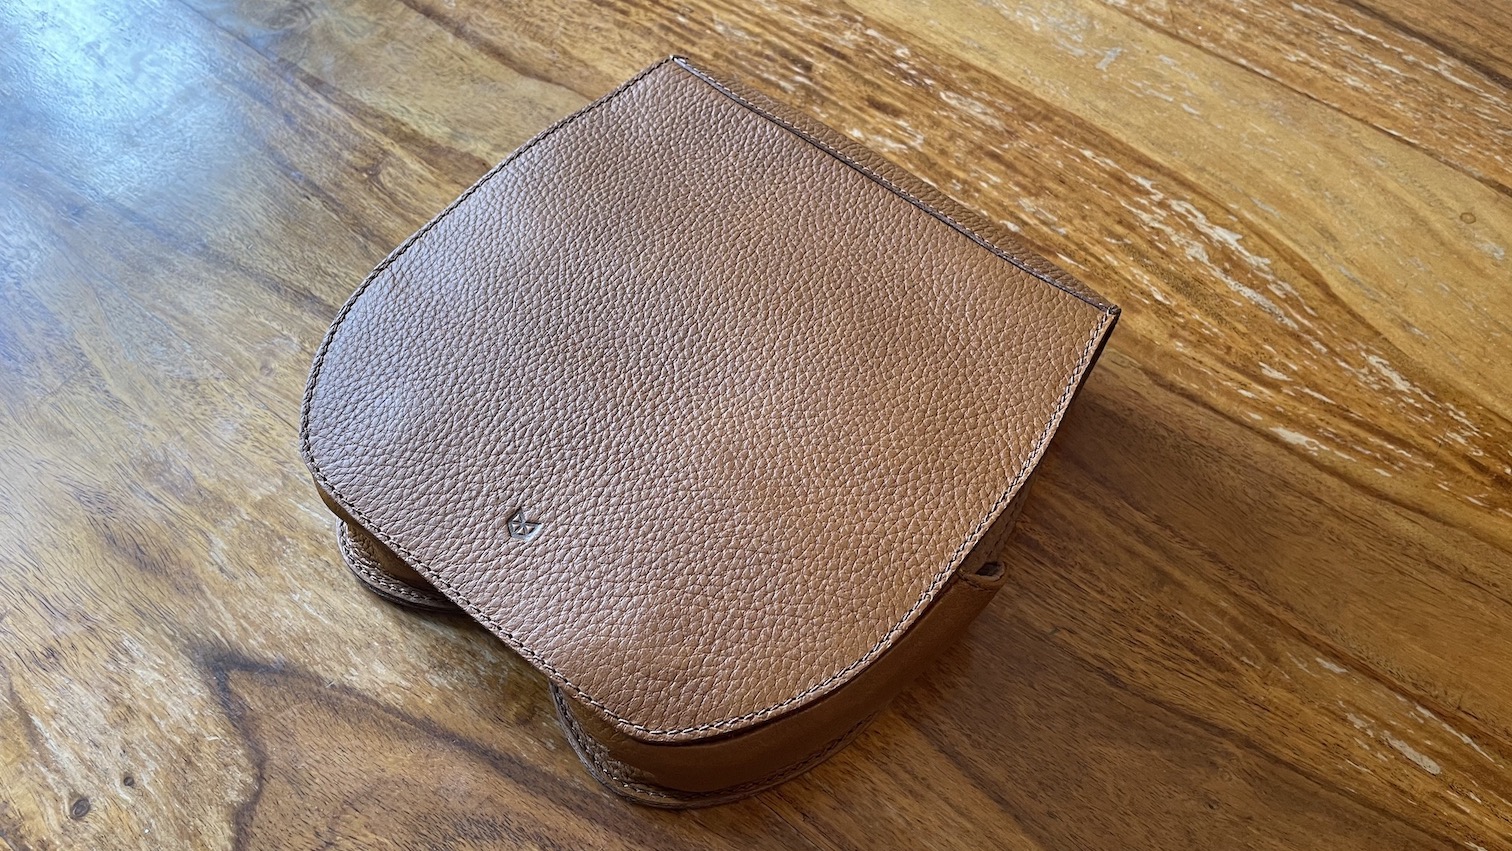 Airpods Pro Premium Leather Case Handmade with Hermes Leather One